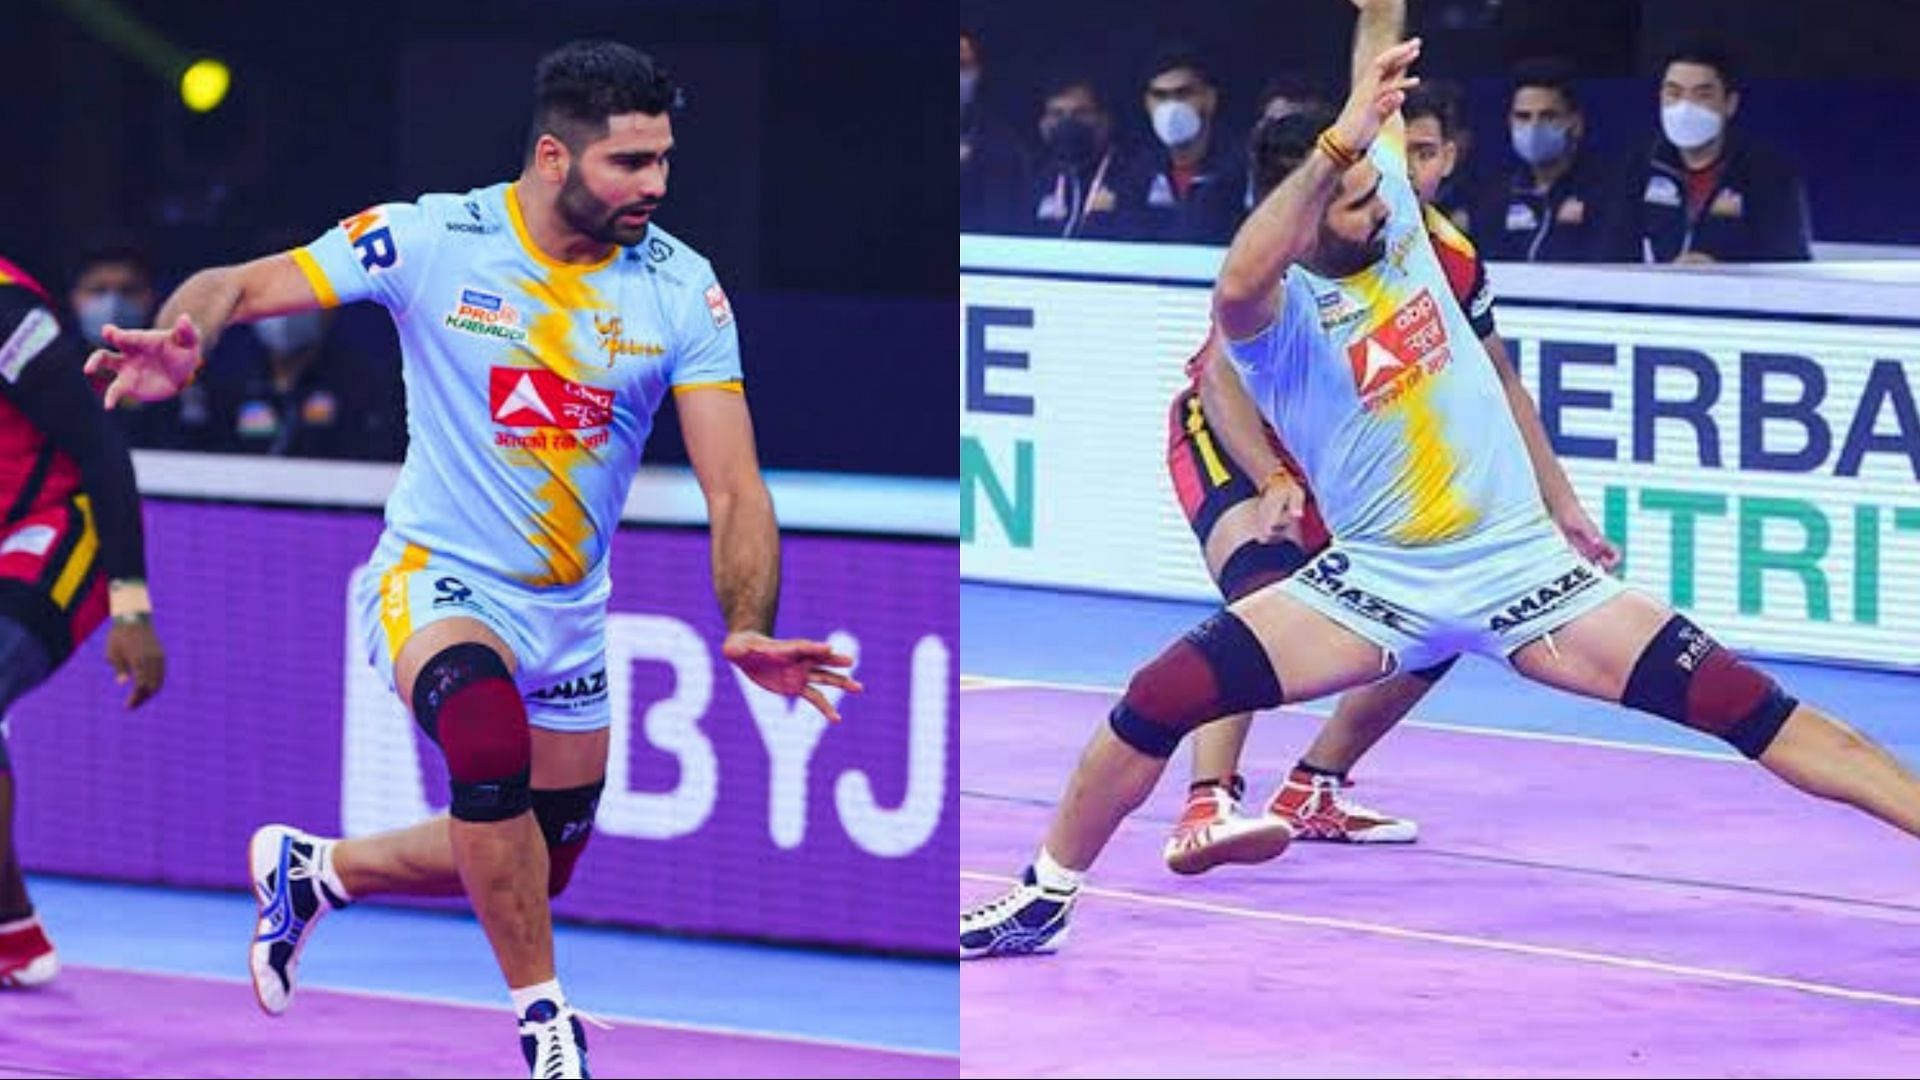 Pardeep Narwal was not included in the starting seven of UP Yoddha for the match against Patna Pirates